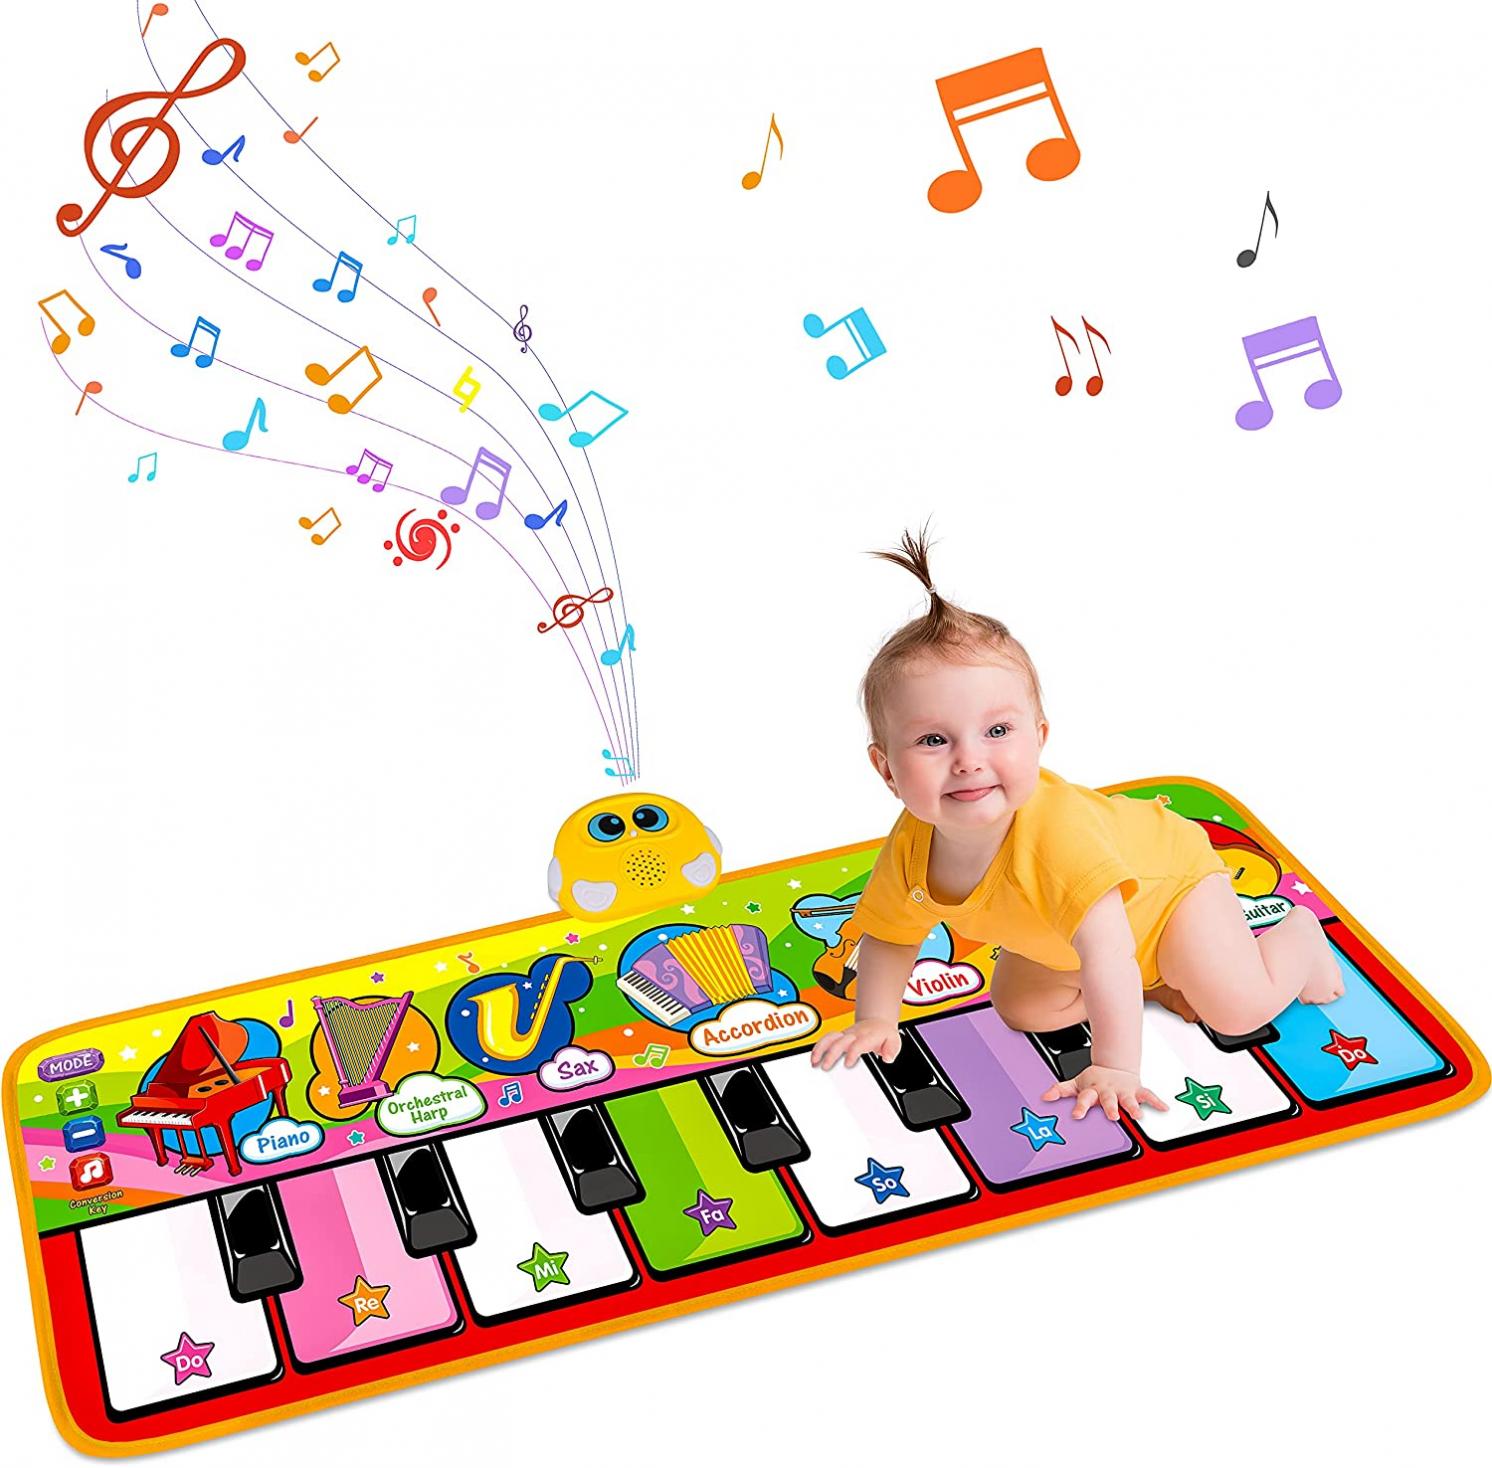 Kids Musical Mats, Musical Toys Child Floor Piano Keyboard Mat-Baby Music Blanket Touch Playmat,Early Learning Education Toys Gifts for 1 2 3 4 Year Old Toddler Girls Boys